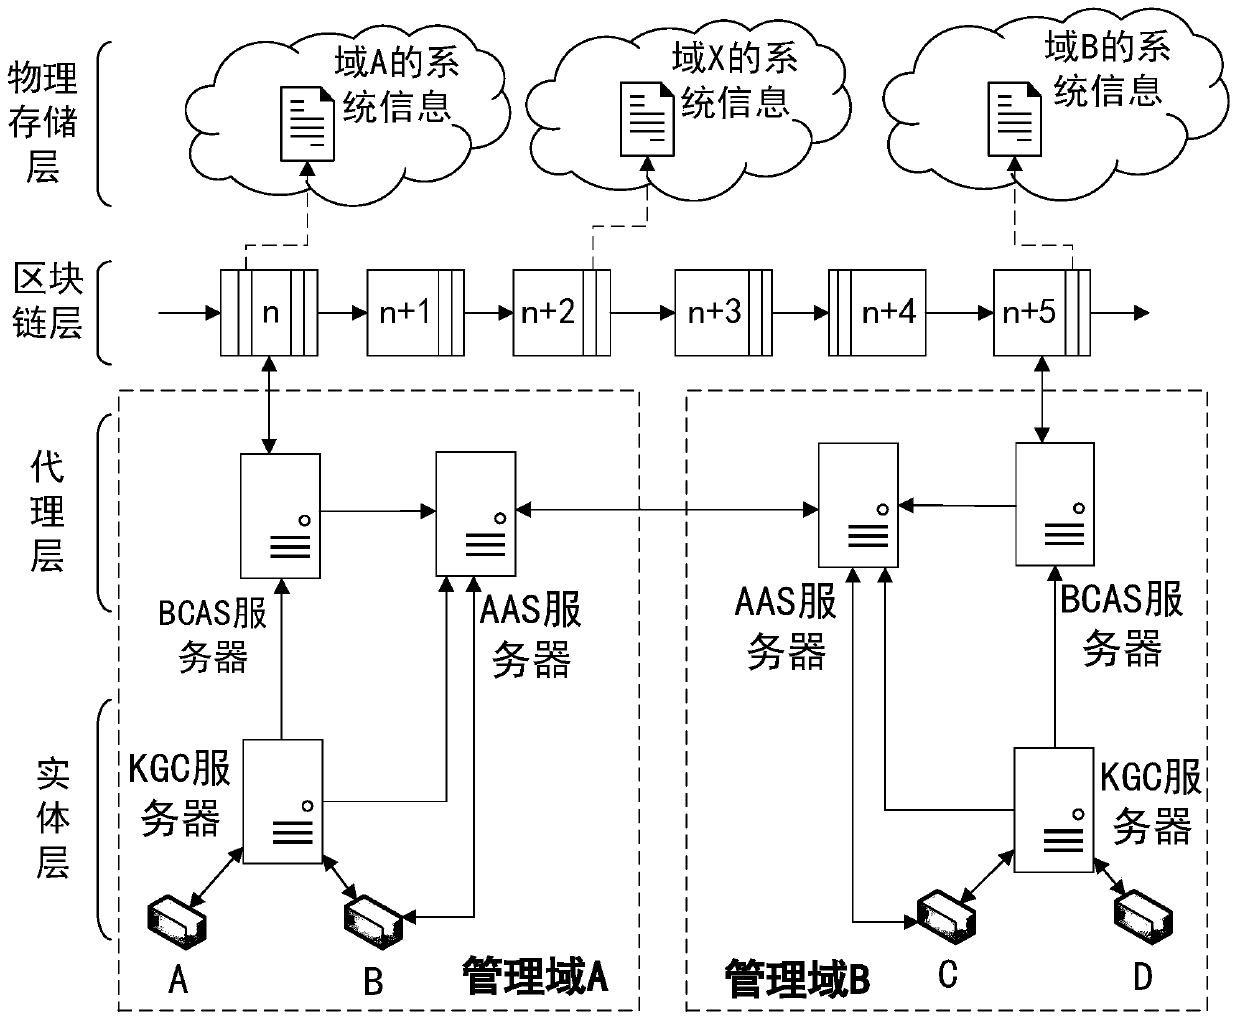 A double-agent cross-domain authentication system based on identification password and alliance chain